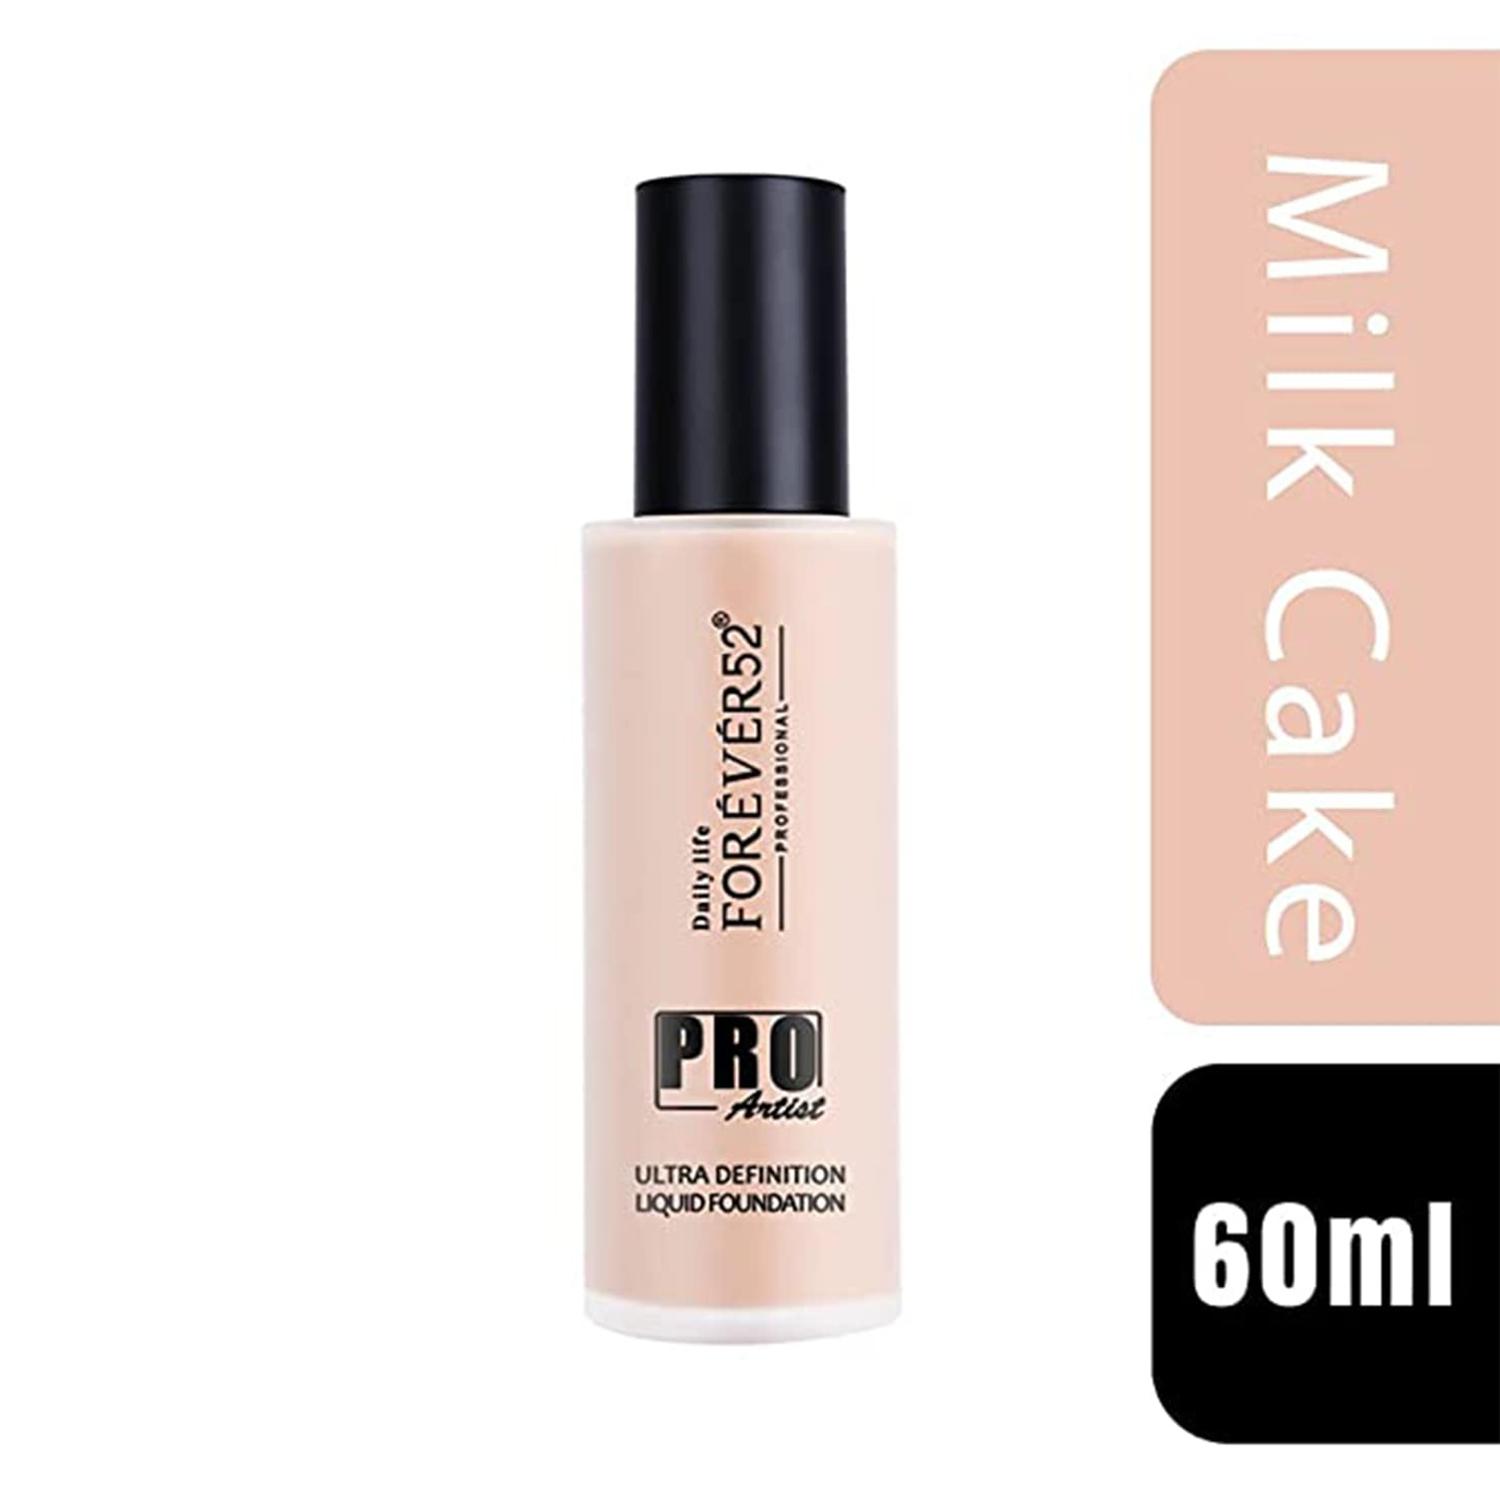 Daily Life Forever52 | Daily Life Forever52 Pro Artist Ultra Definition Liquid Foundation - Milk Cake (60ml)